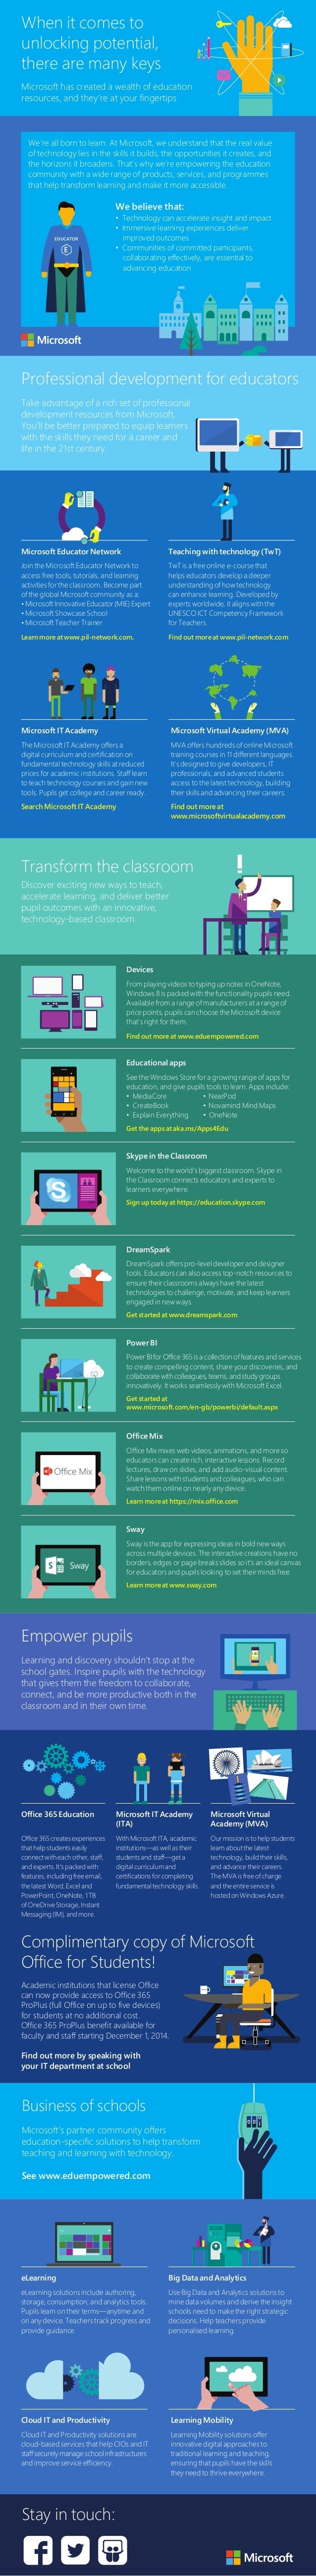 Microsoft In Education Infographic E Learning Infographics